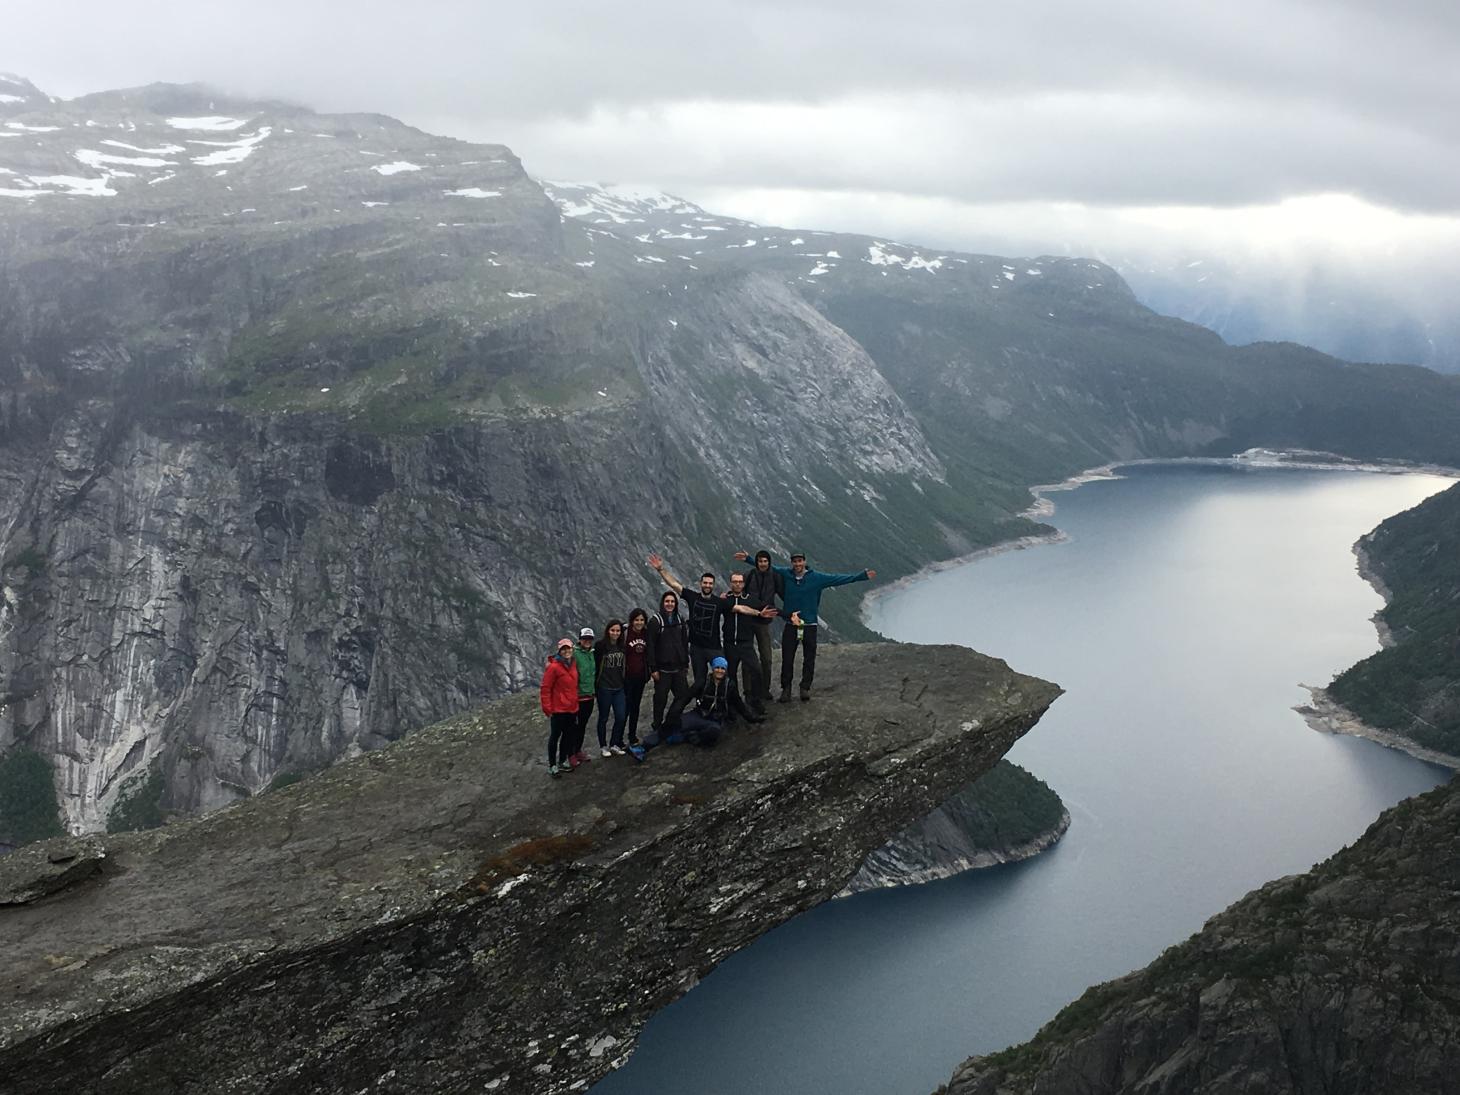 A group of people standing on a cliffside overlooking a river.